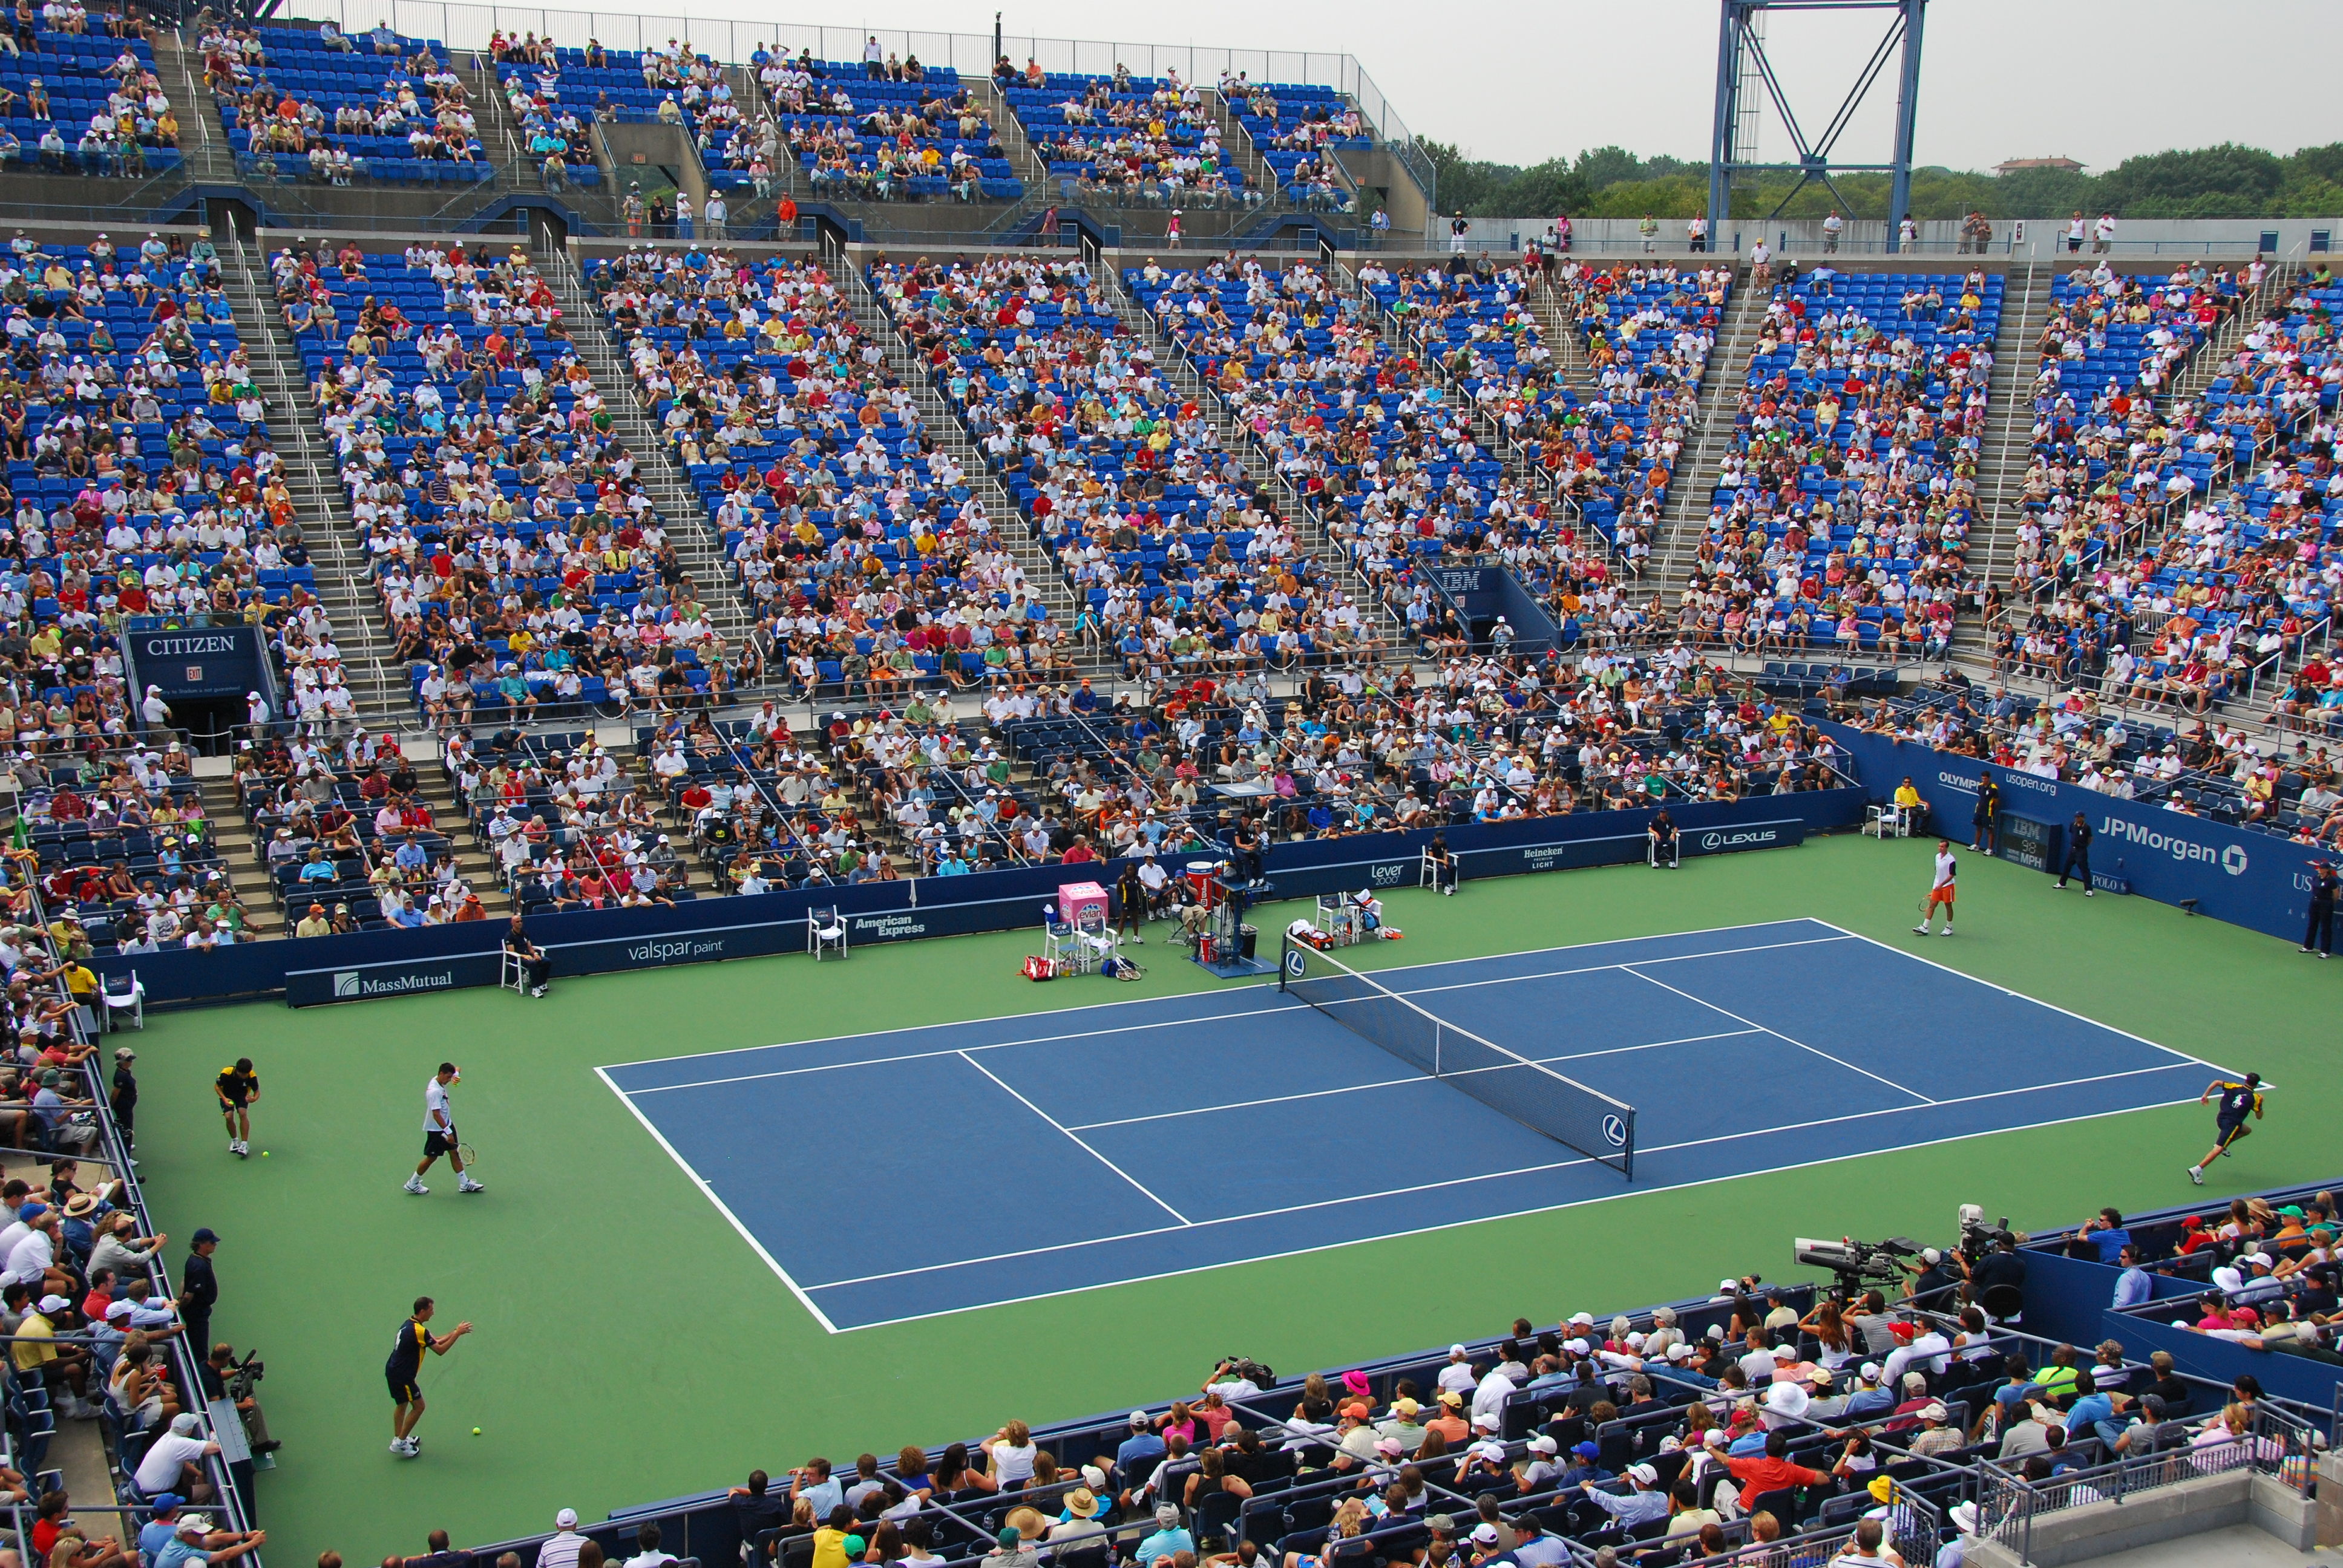 US open tennis stadium during a day match